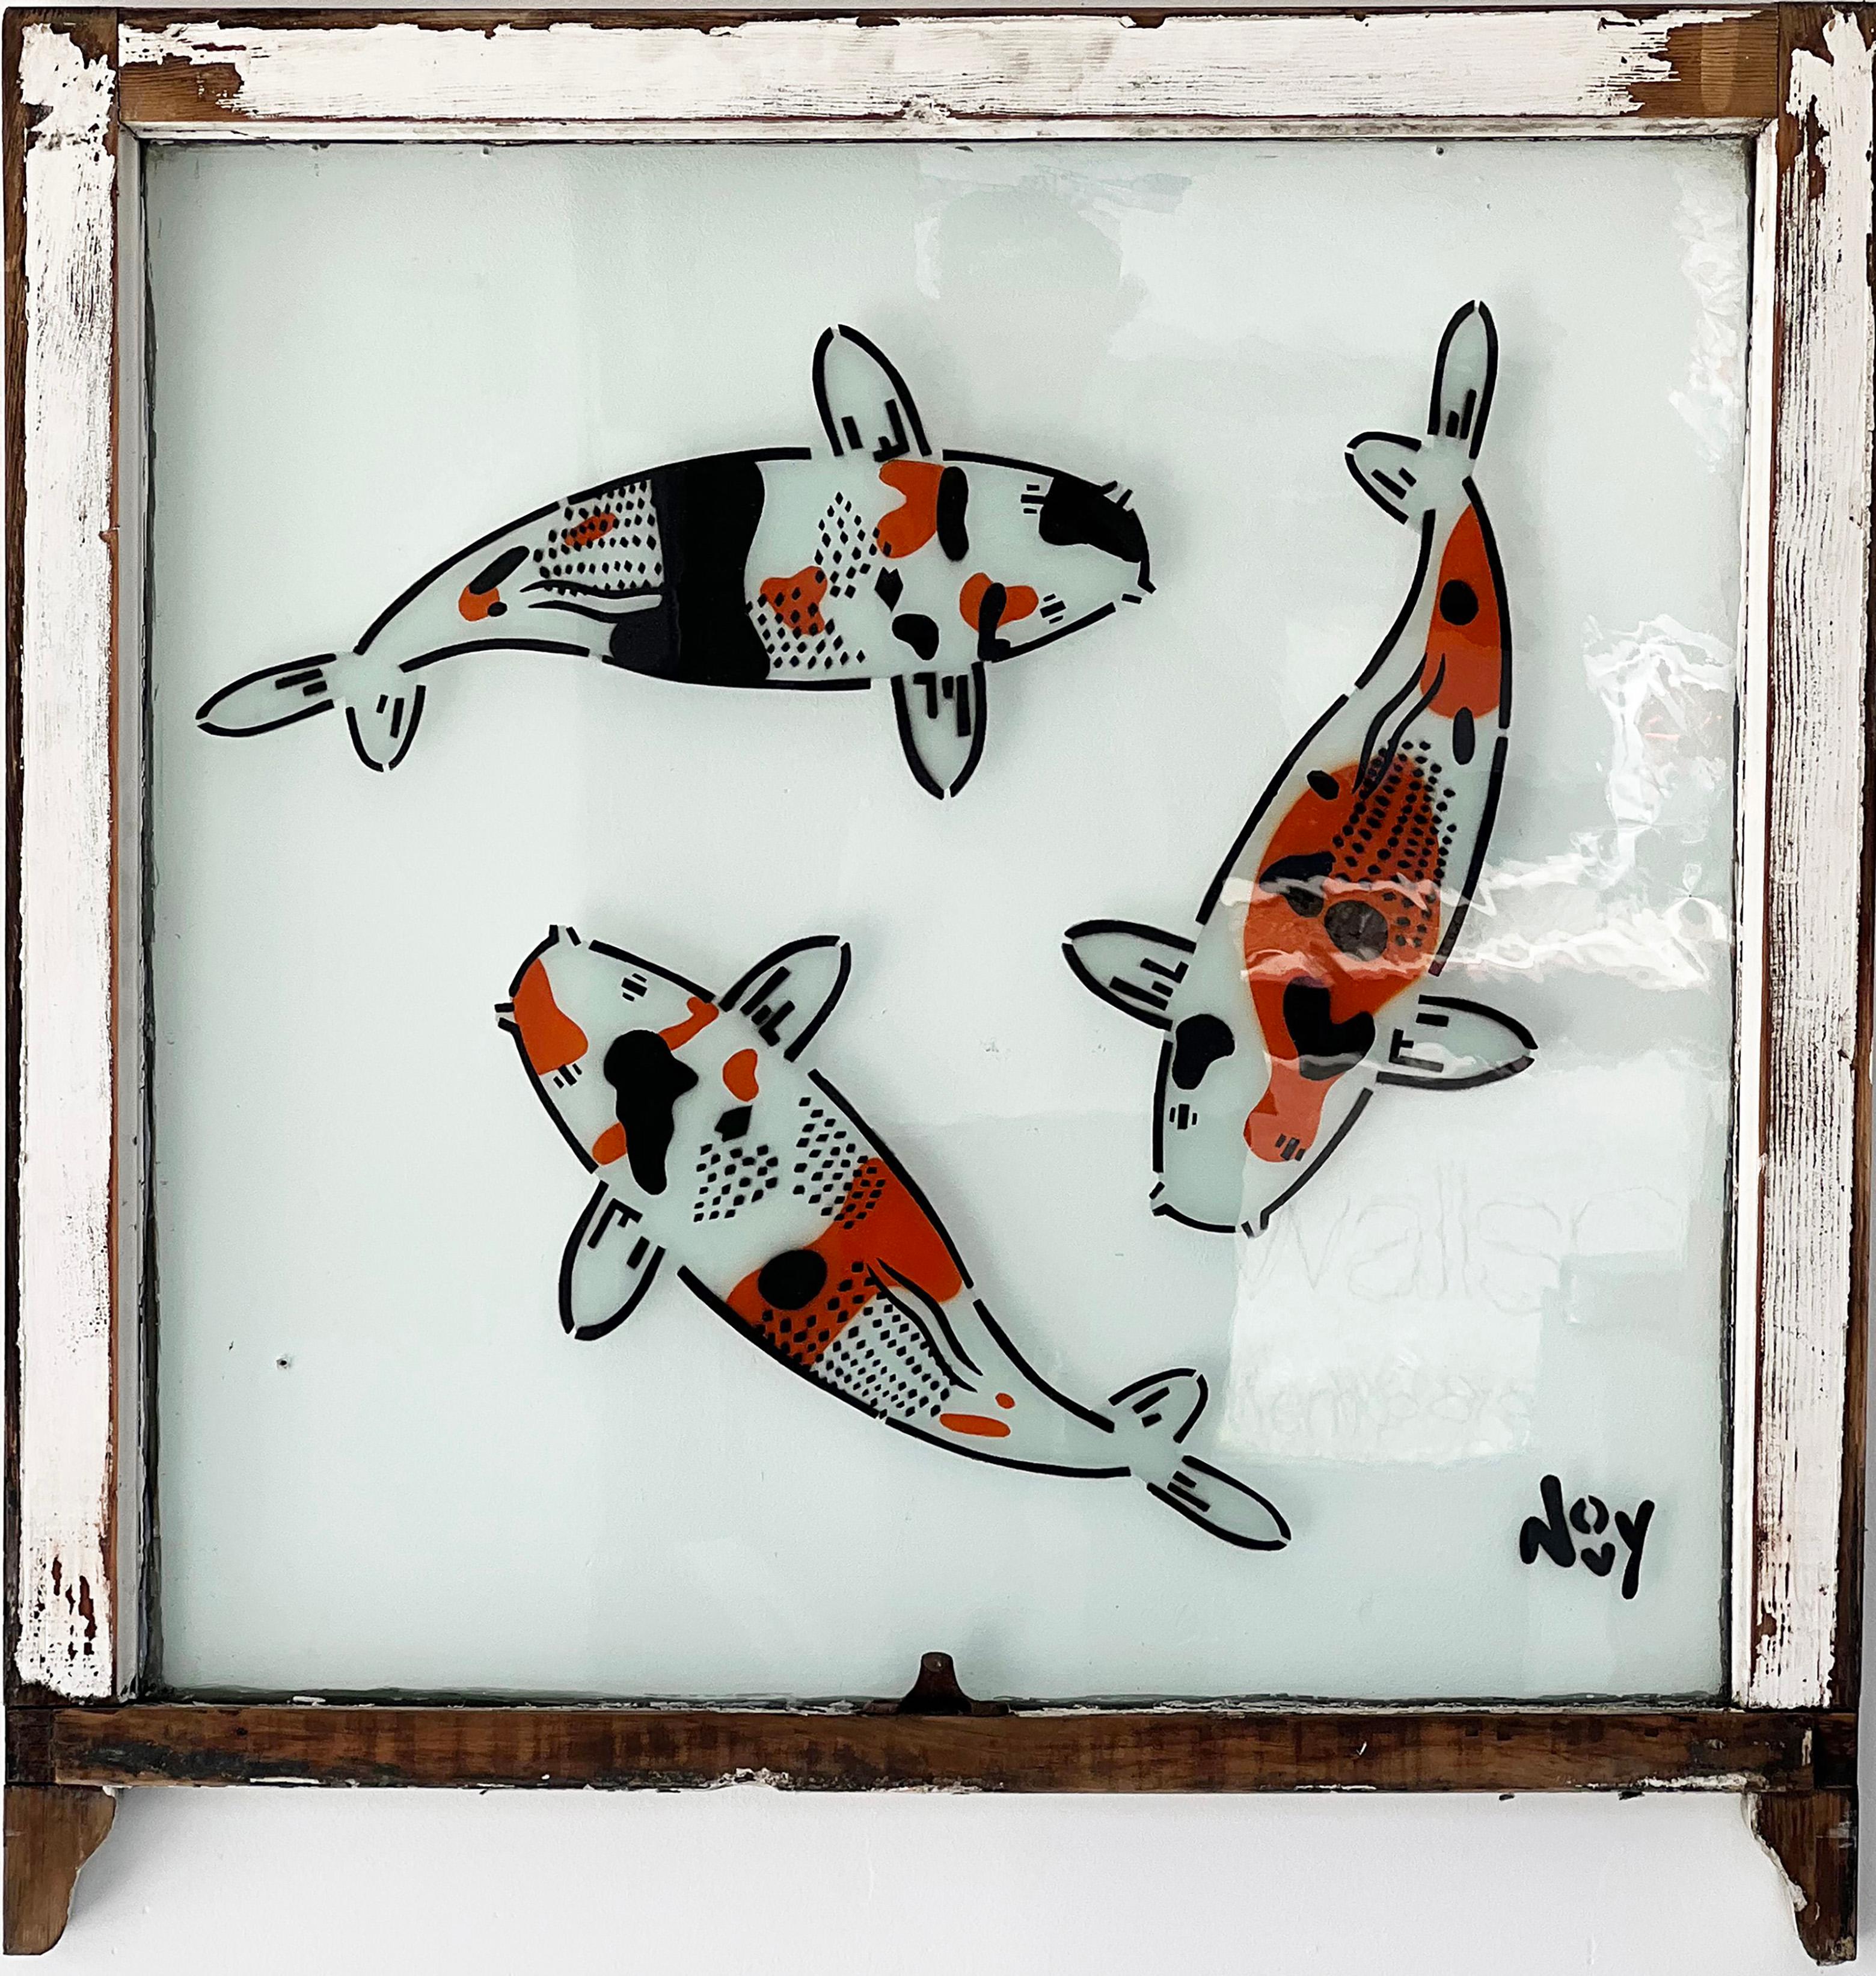 3 Koi spray painted stencil on white-brown stained wood window frame